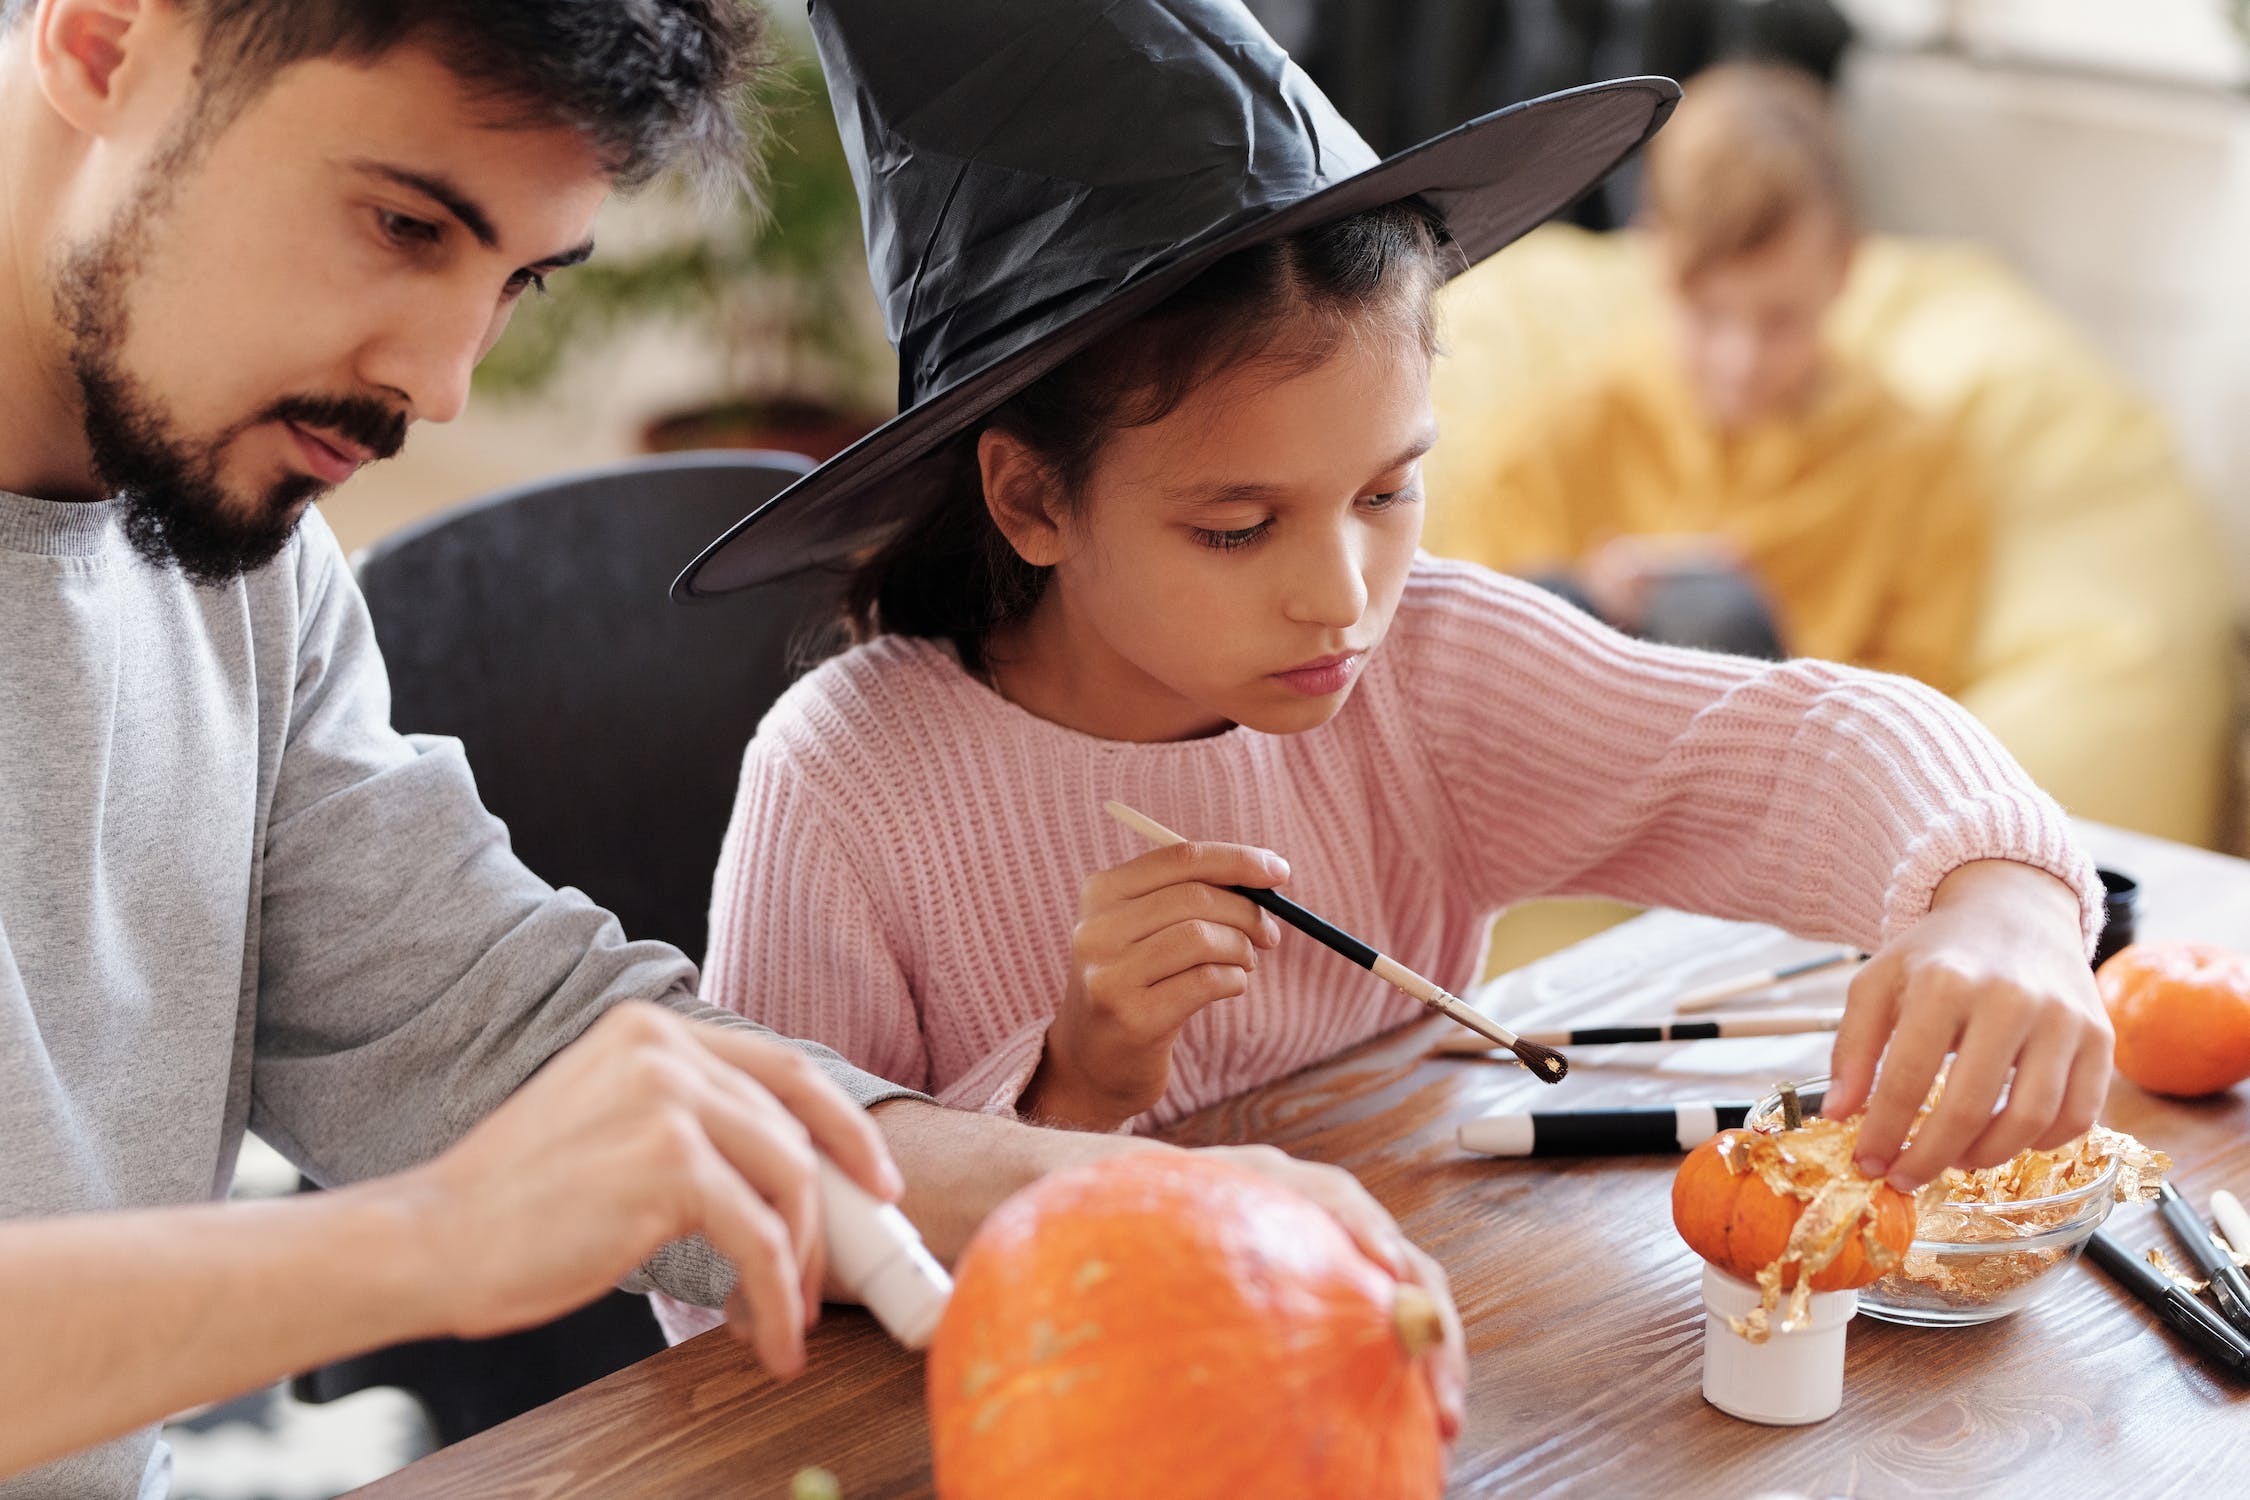 A family at a pumpkin-painting event.